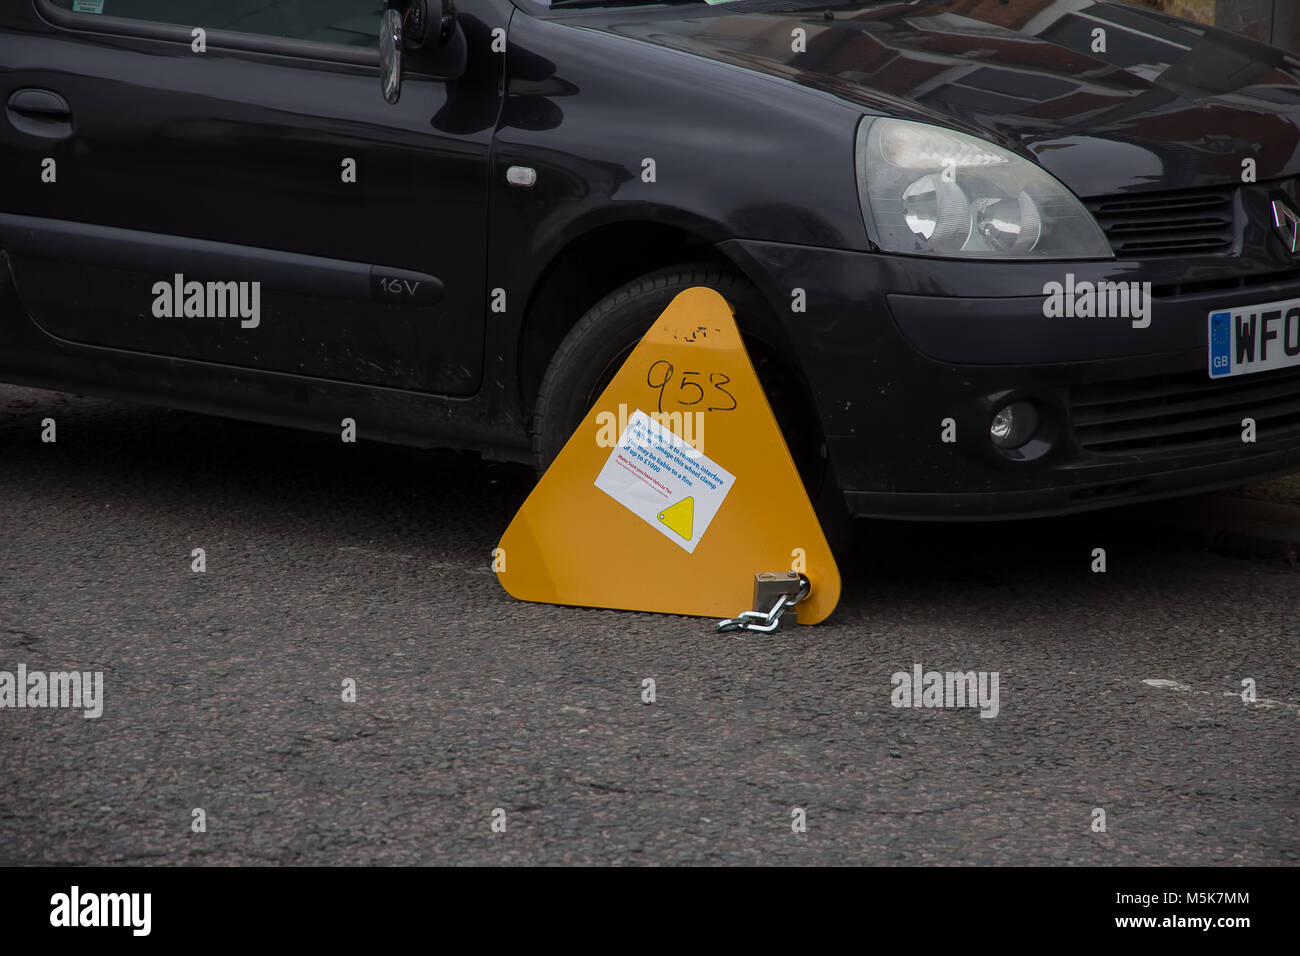 A clamp attached to a vehicle penalised for unpaid vehicle tax Stock Photo